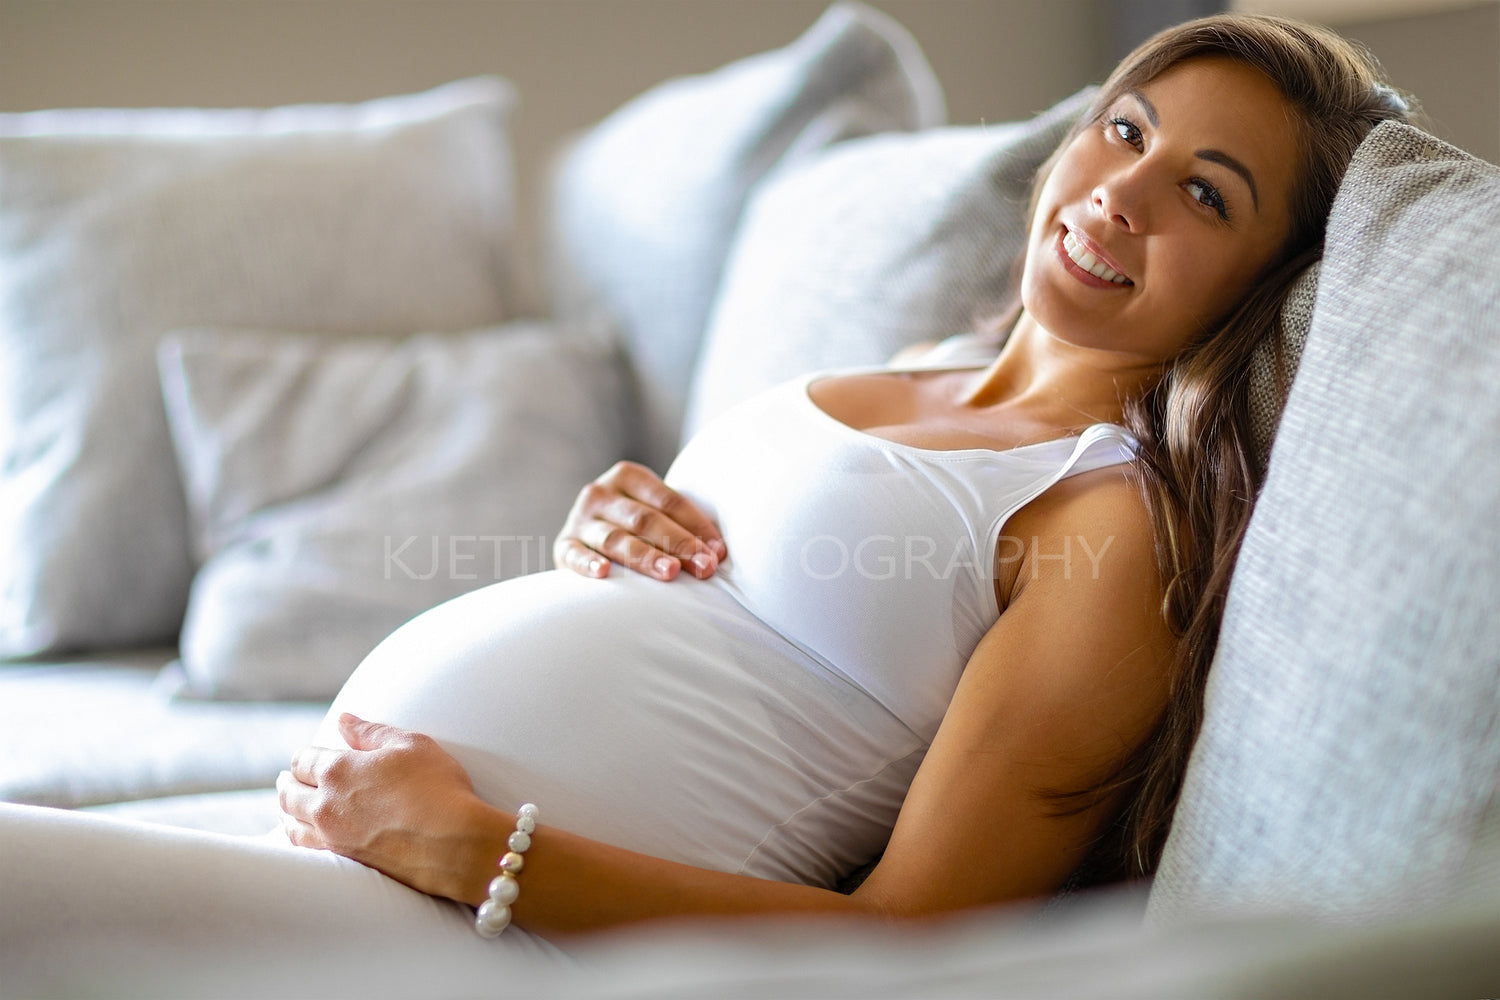 Smiling pregnant woman lying on the sofa touching her belly